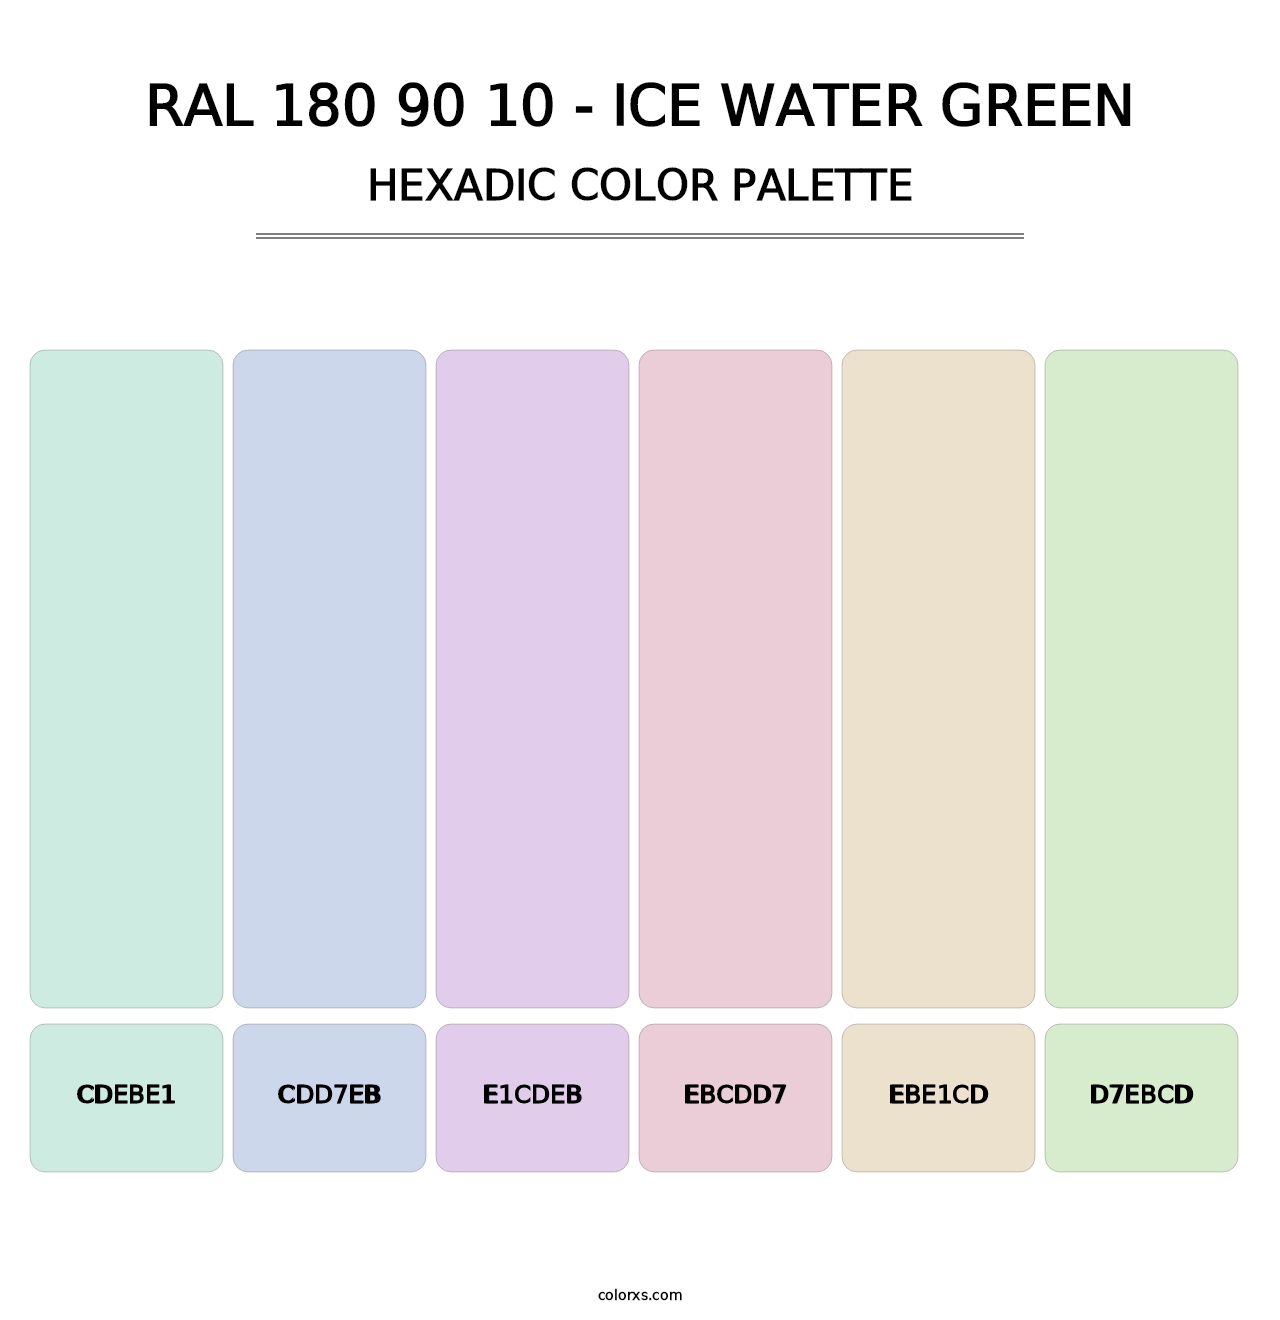 RAL 180 90 10 - Ice Water Green - Hexadic Color Palette